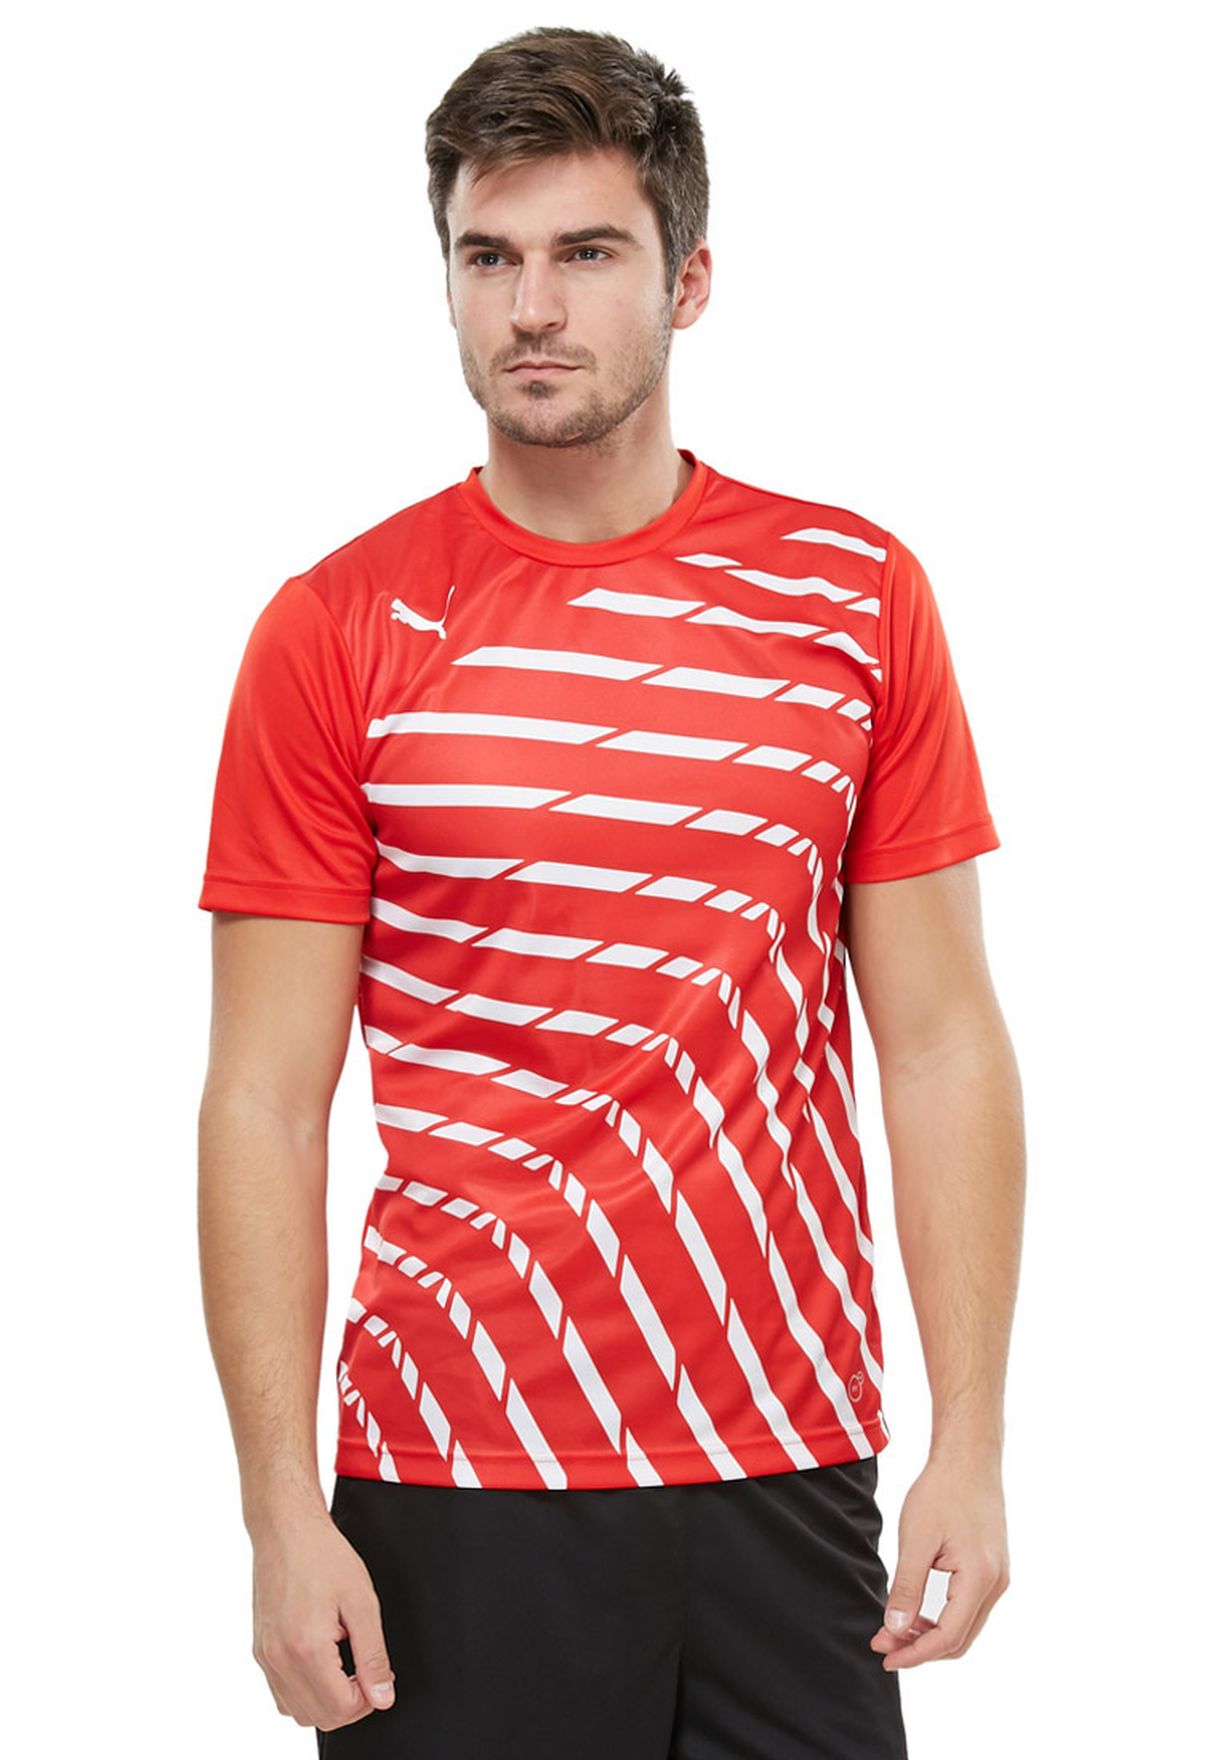 Buy Puma Red Bts Graphic T Shirt for 